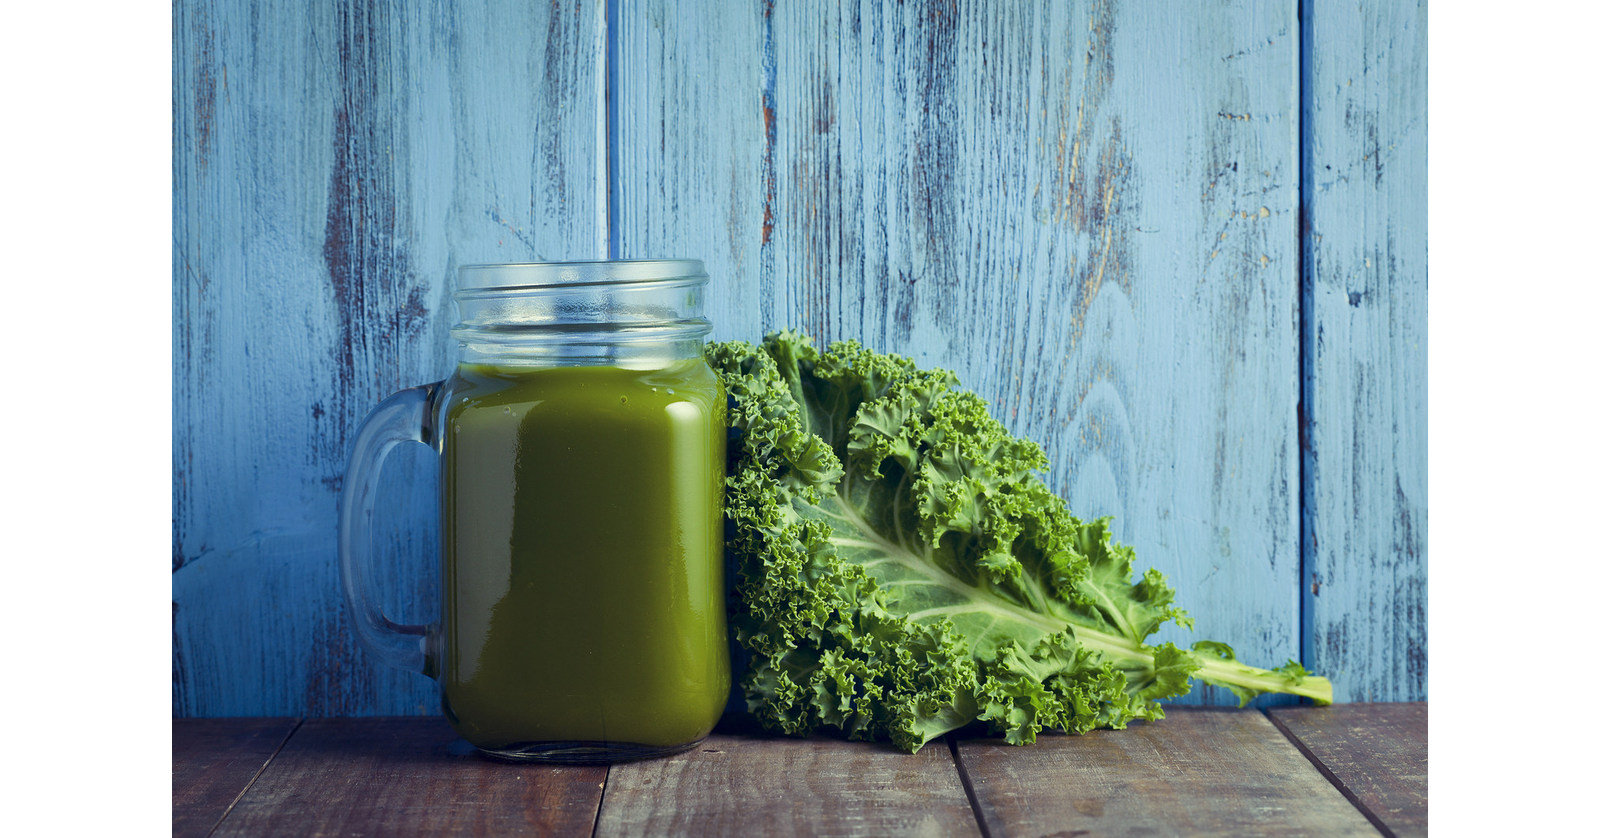 Eating too much kale causes kale poisoning – Villanova College